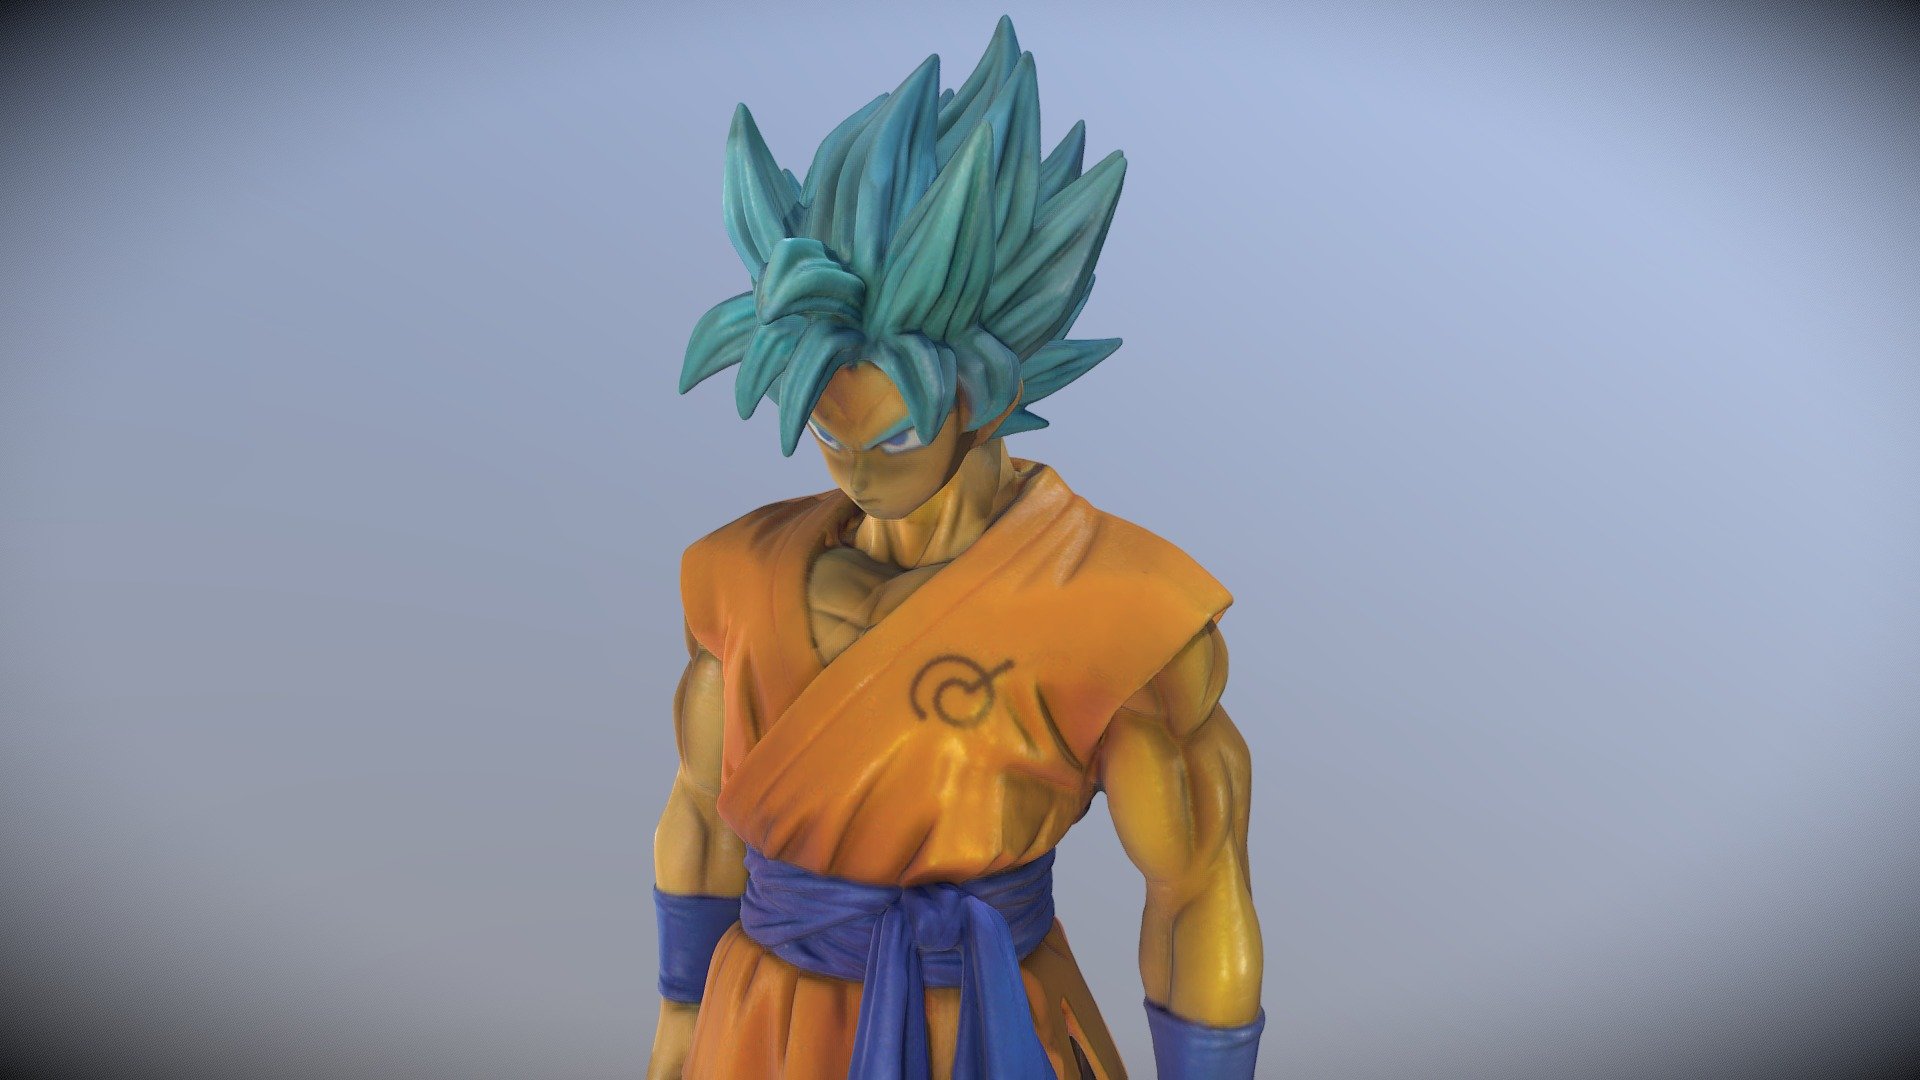 High poly 3D-Scan (also 3D-printable) of Goku in his blue form. Scan of anime figure standing 10 inches tall. The slightly larger size allowed for nice texture scan 3d model